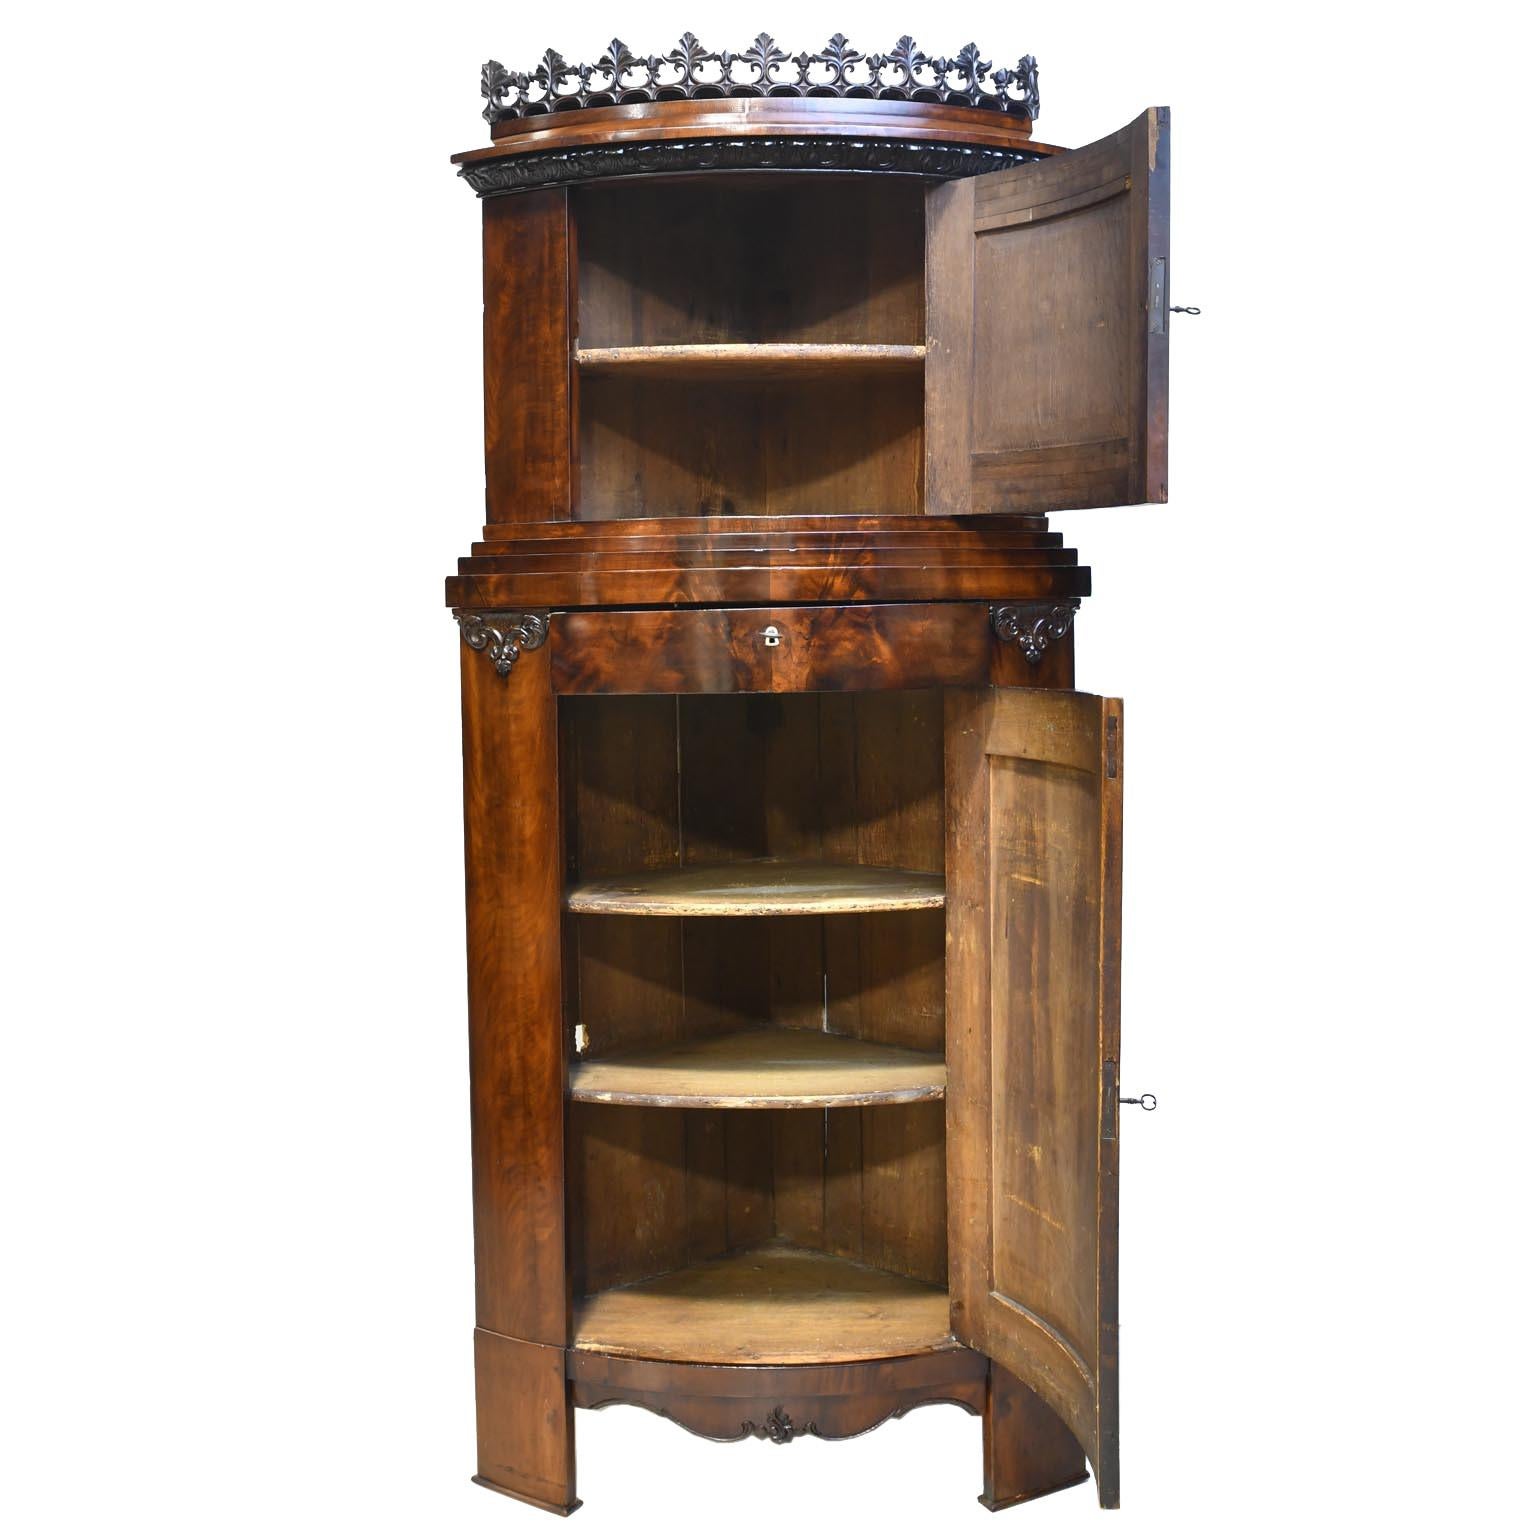 From the Baltic region, a very beautiful and unusual Empire corner cupboard in fine West Indies/ Cuban mahogany with two stacked cabinet doors that are bowed, and are separated by a drawer. Some distinctive architectural details include the finely